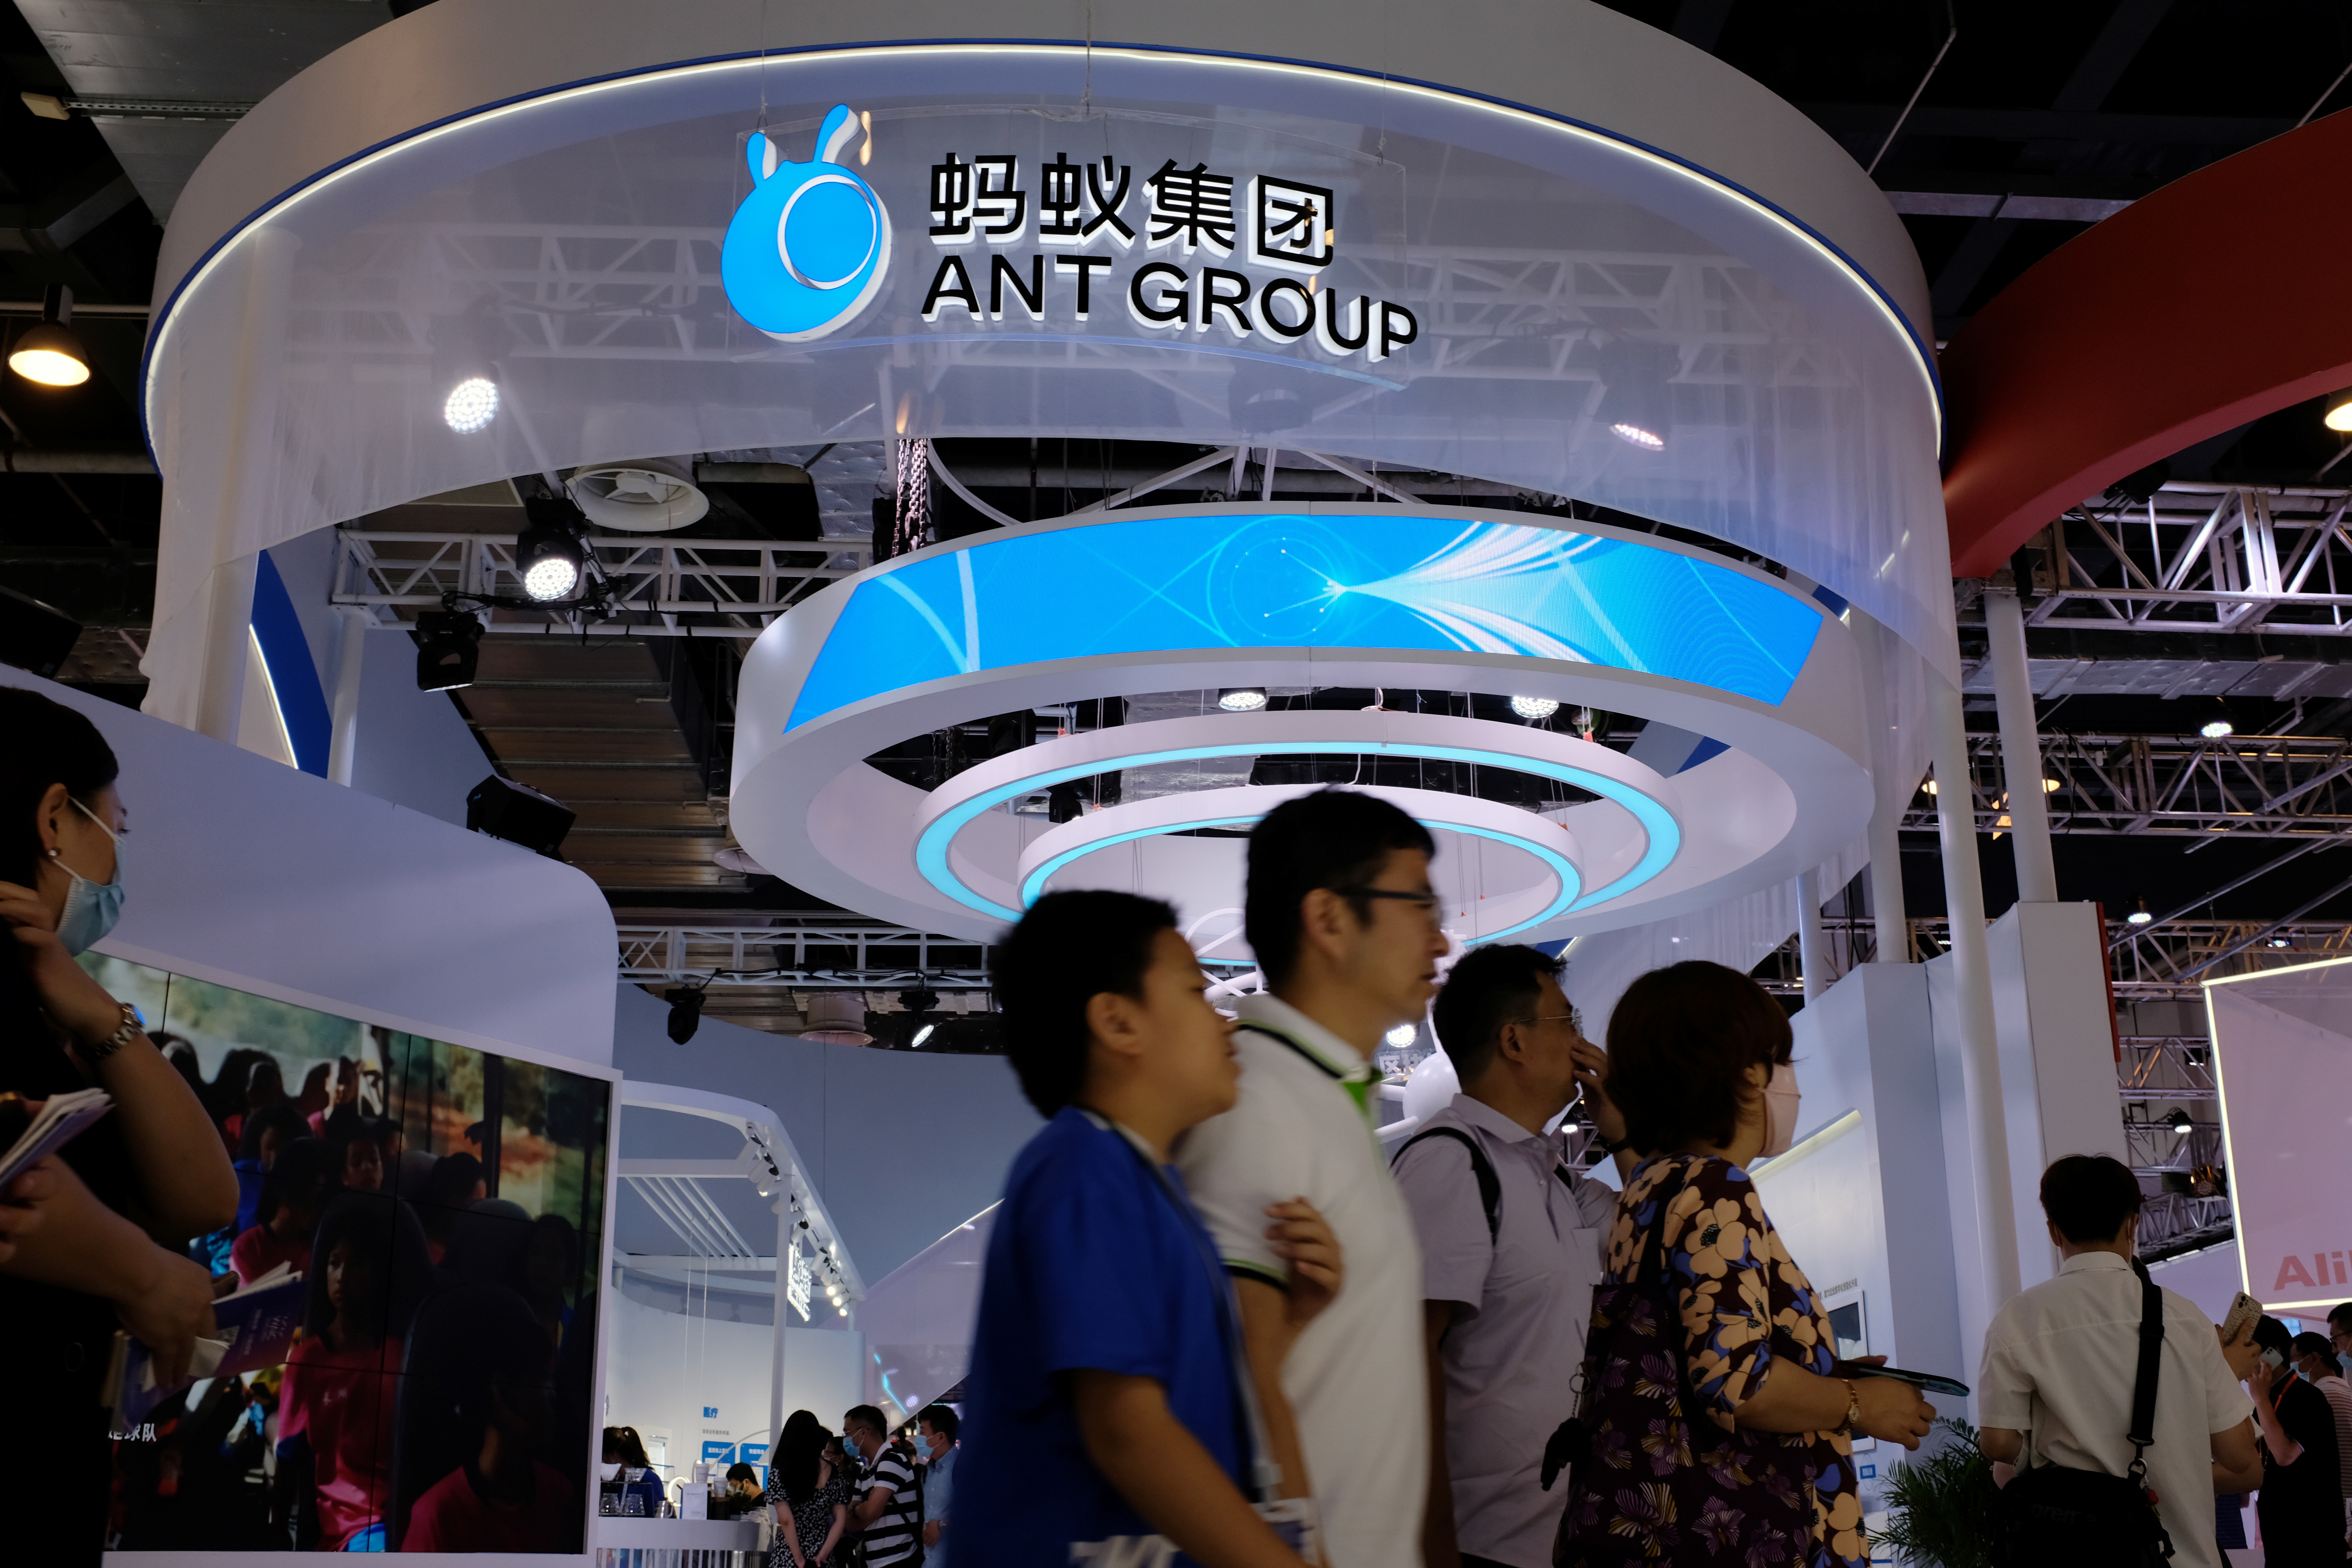 People walk past the Ant Group booth at the World Artificial Intelligence Conference (WAIC) in Shanghai, China, July 8, 2021. REUTERS/Yilei Sun